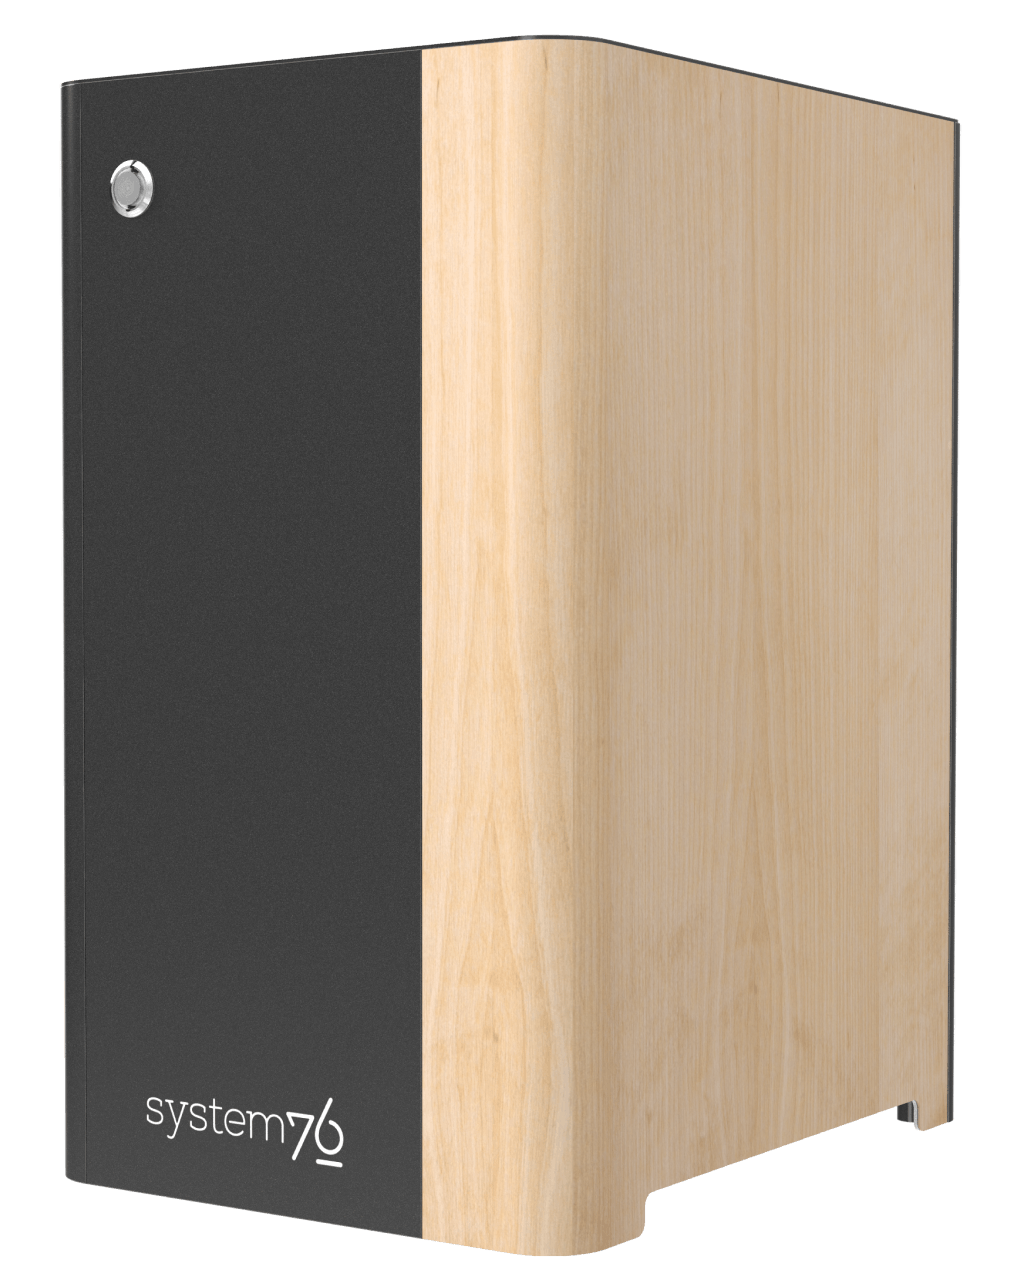 Side view of the machine showing birch veneer component.